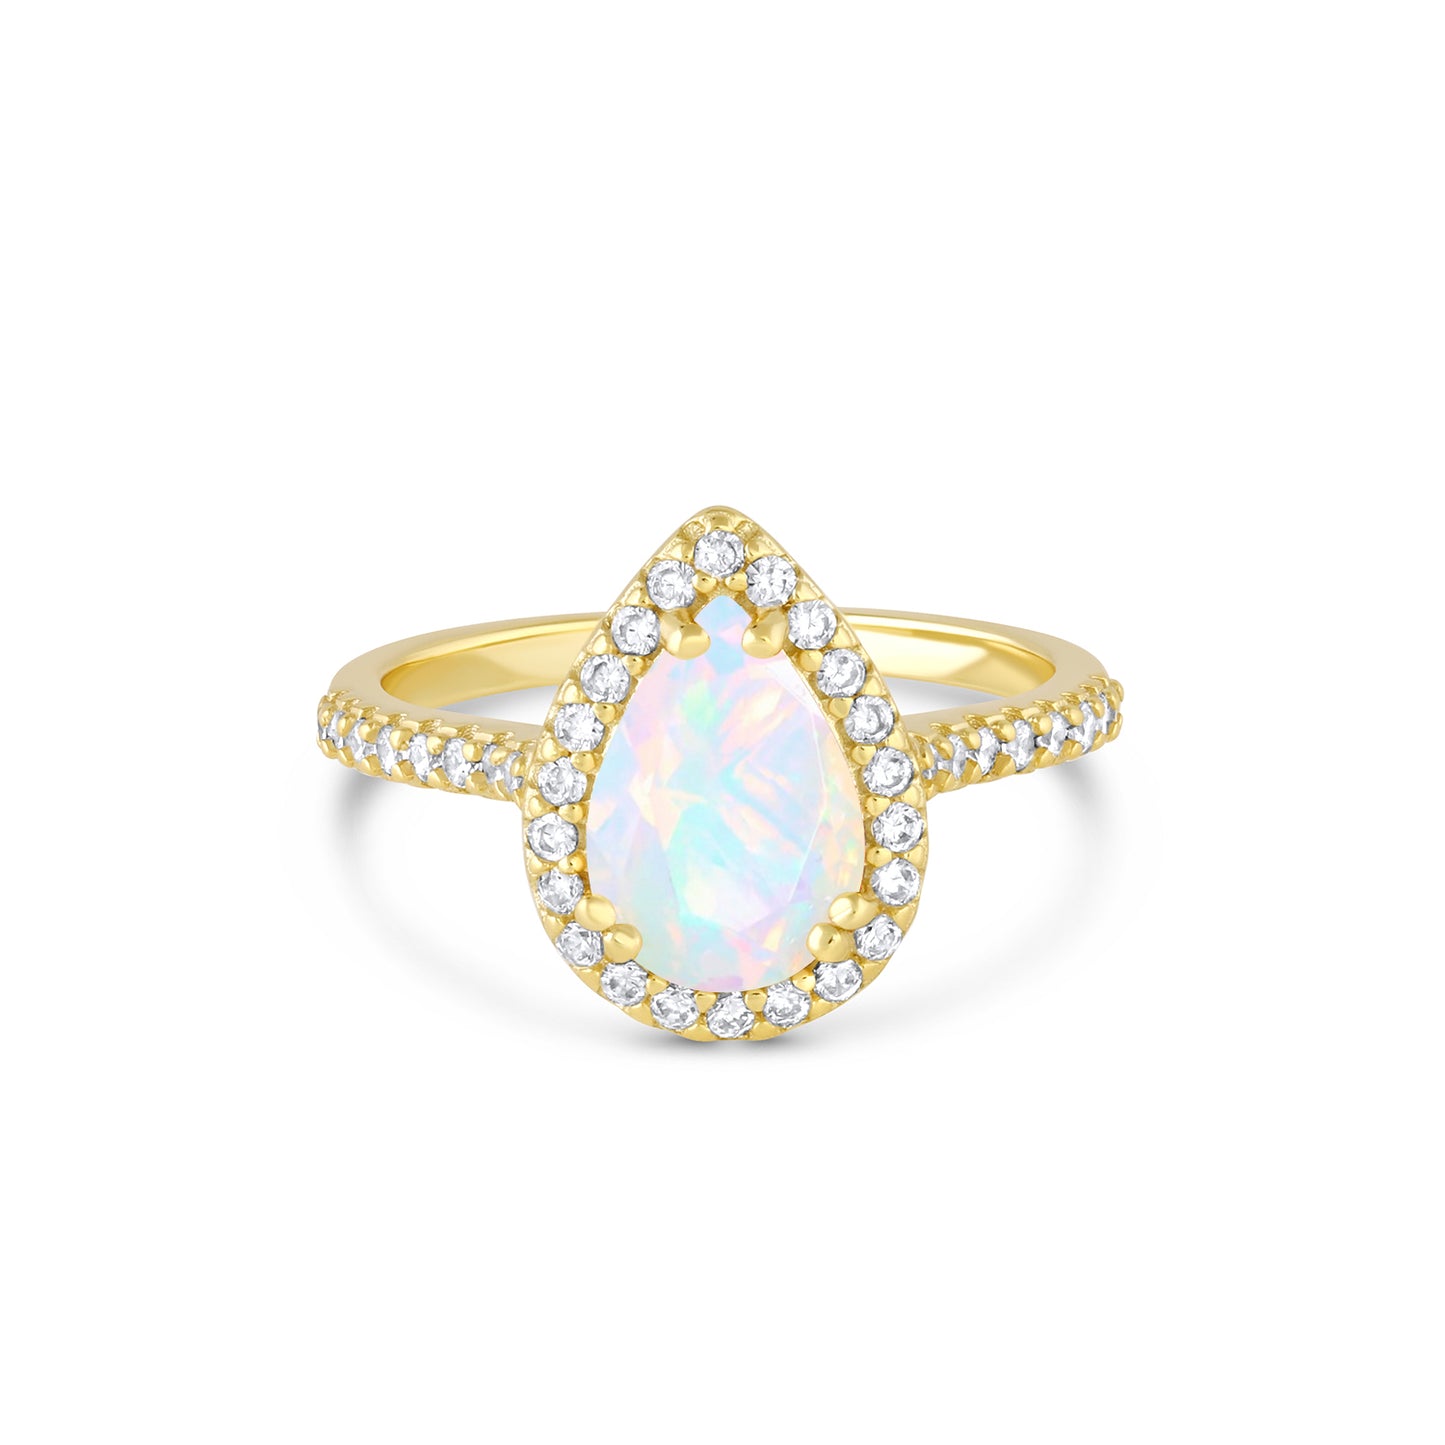 Nia Opal Ring Sterling Silver